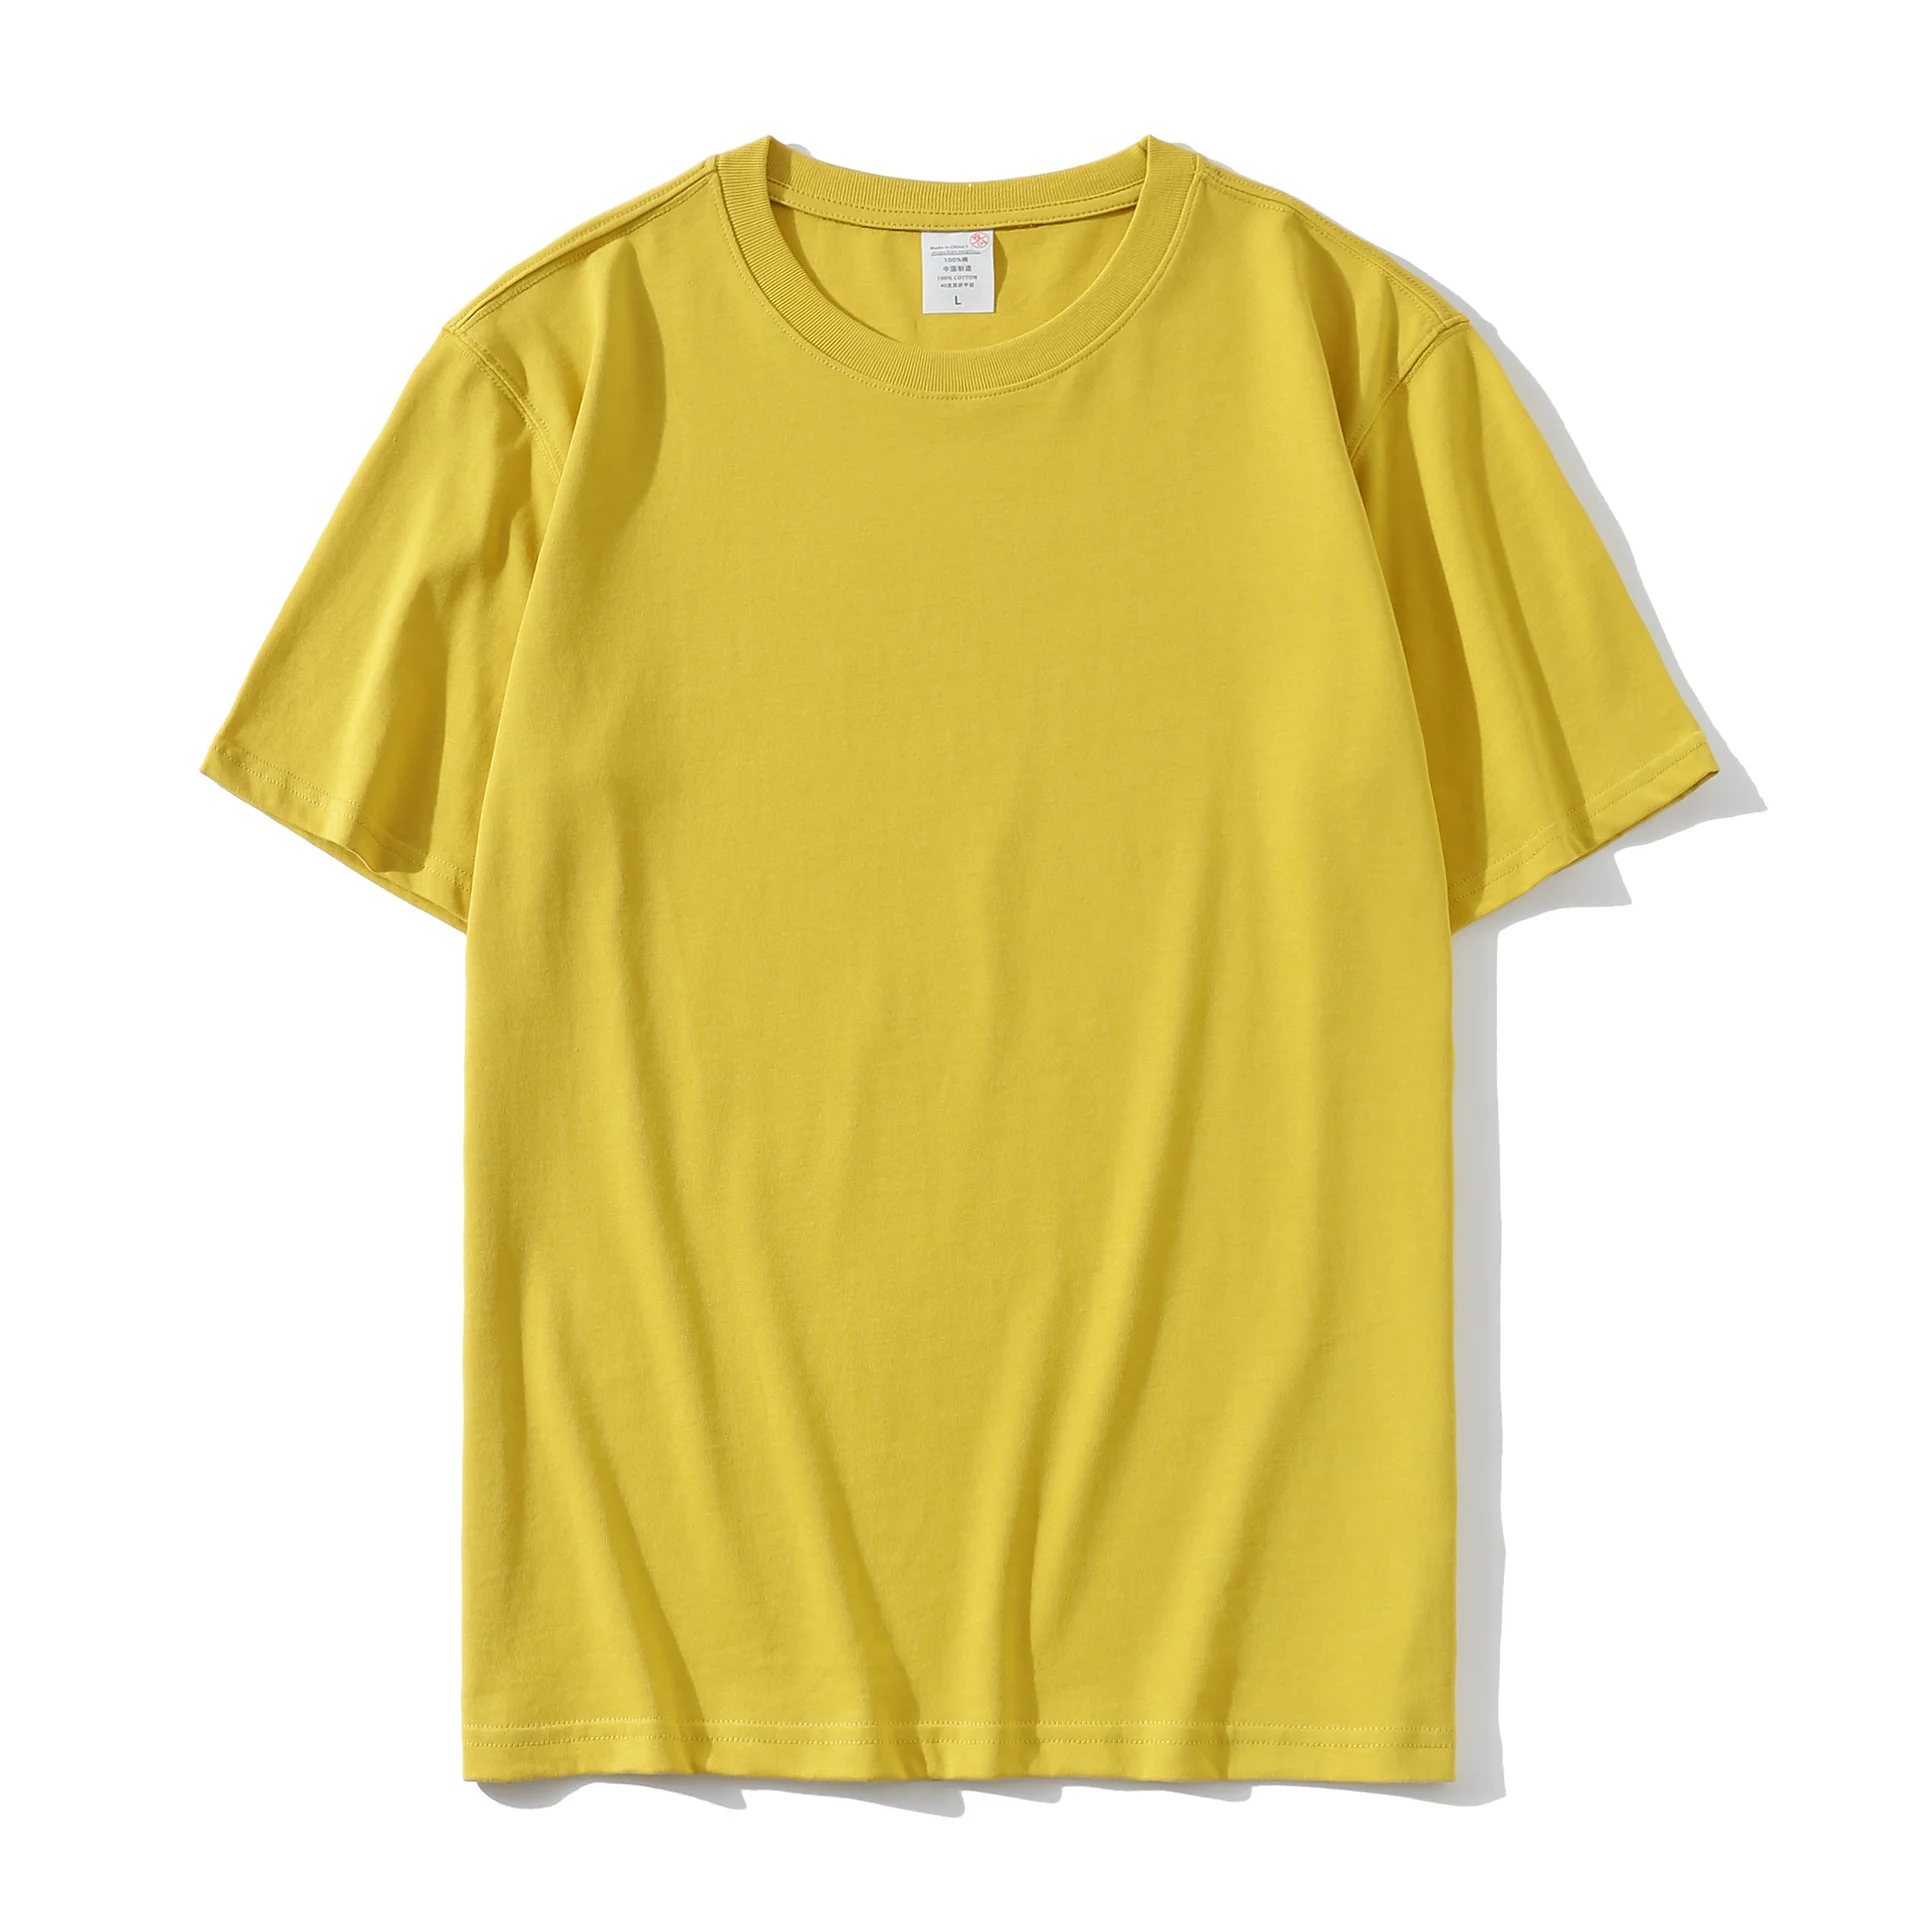 Wholesale Blank T shirts for Printing in Abilene